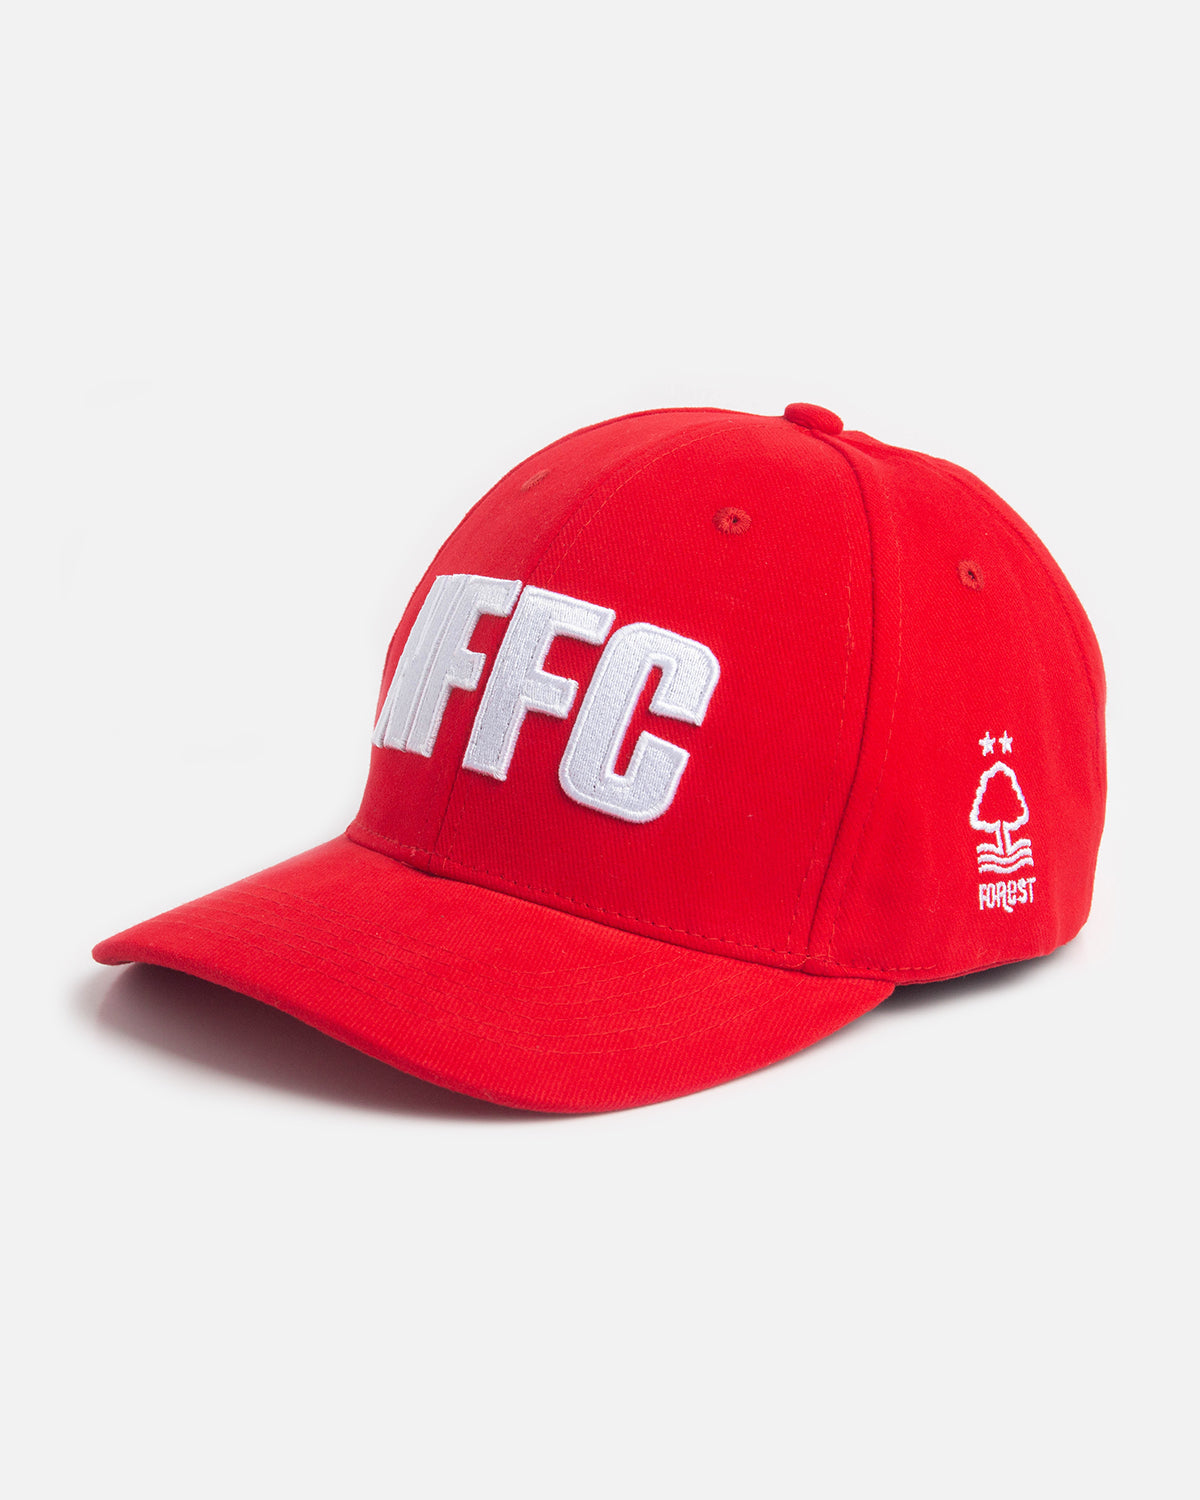 NFFC Red Text Structured Cap